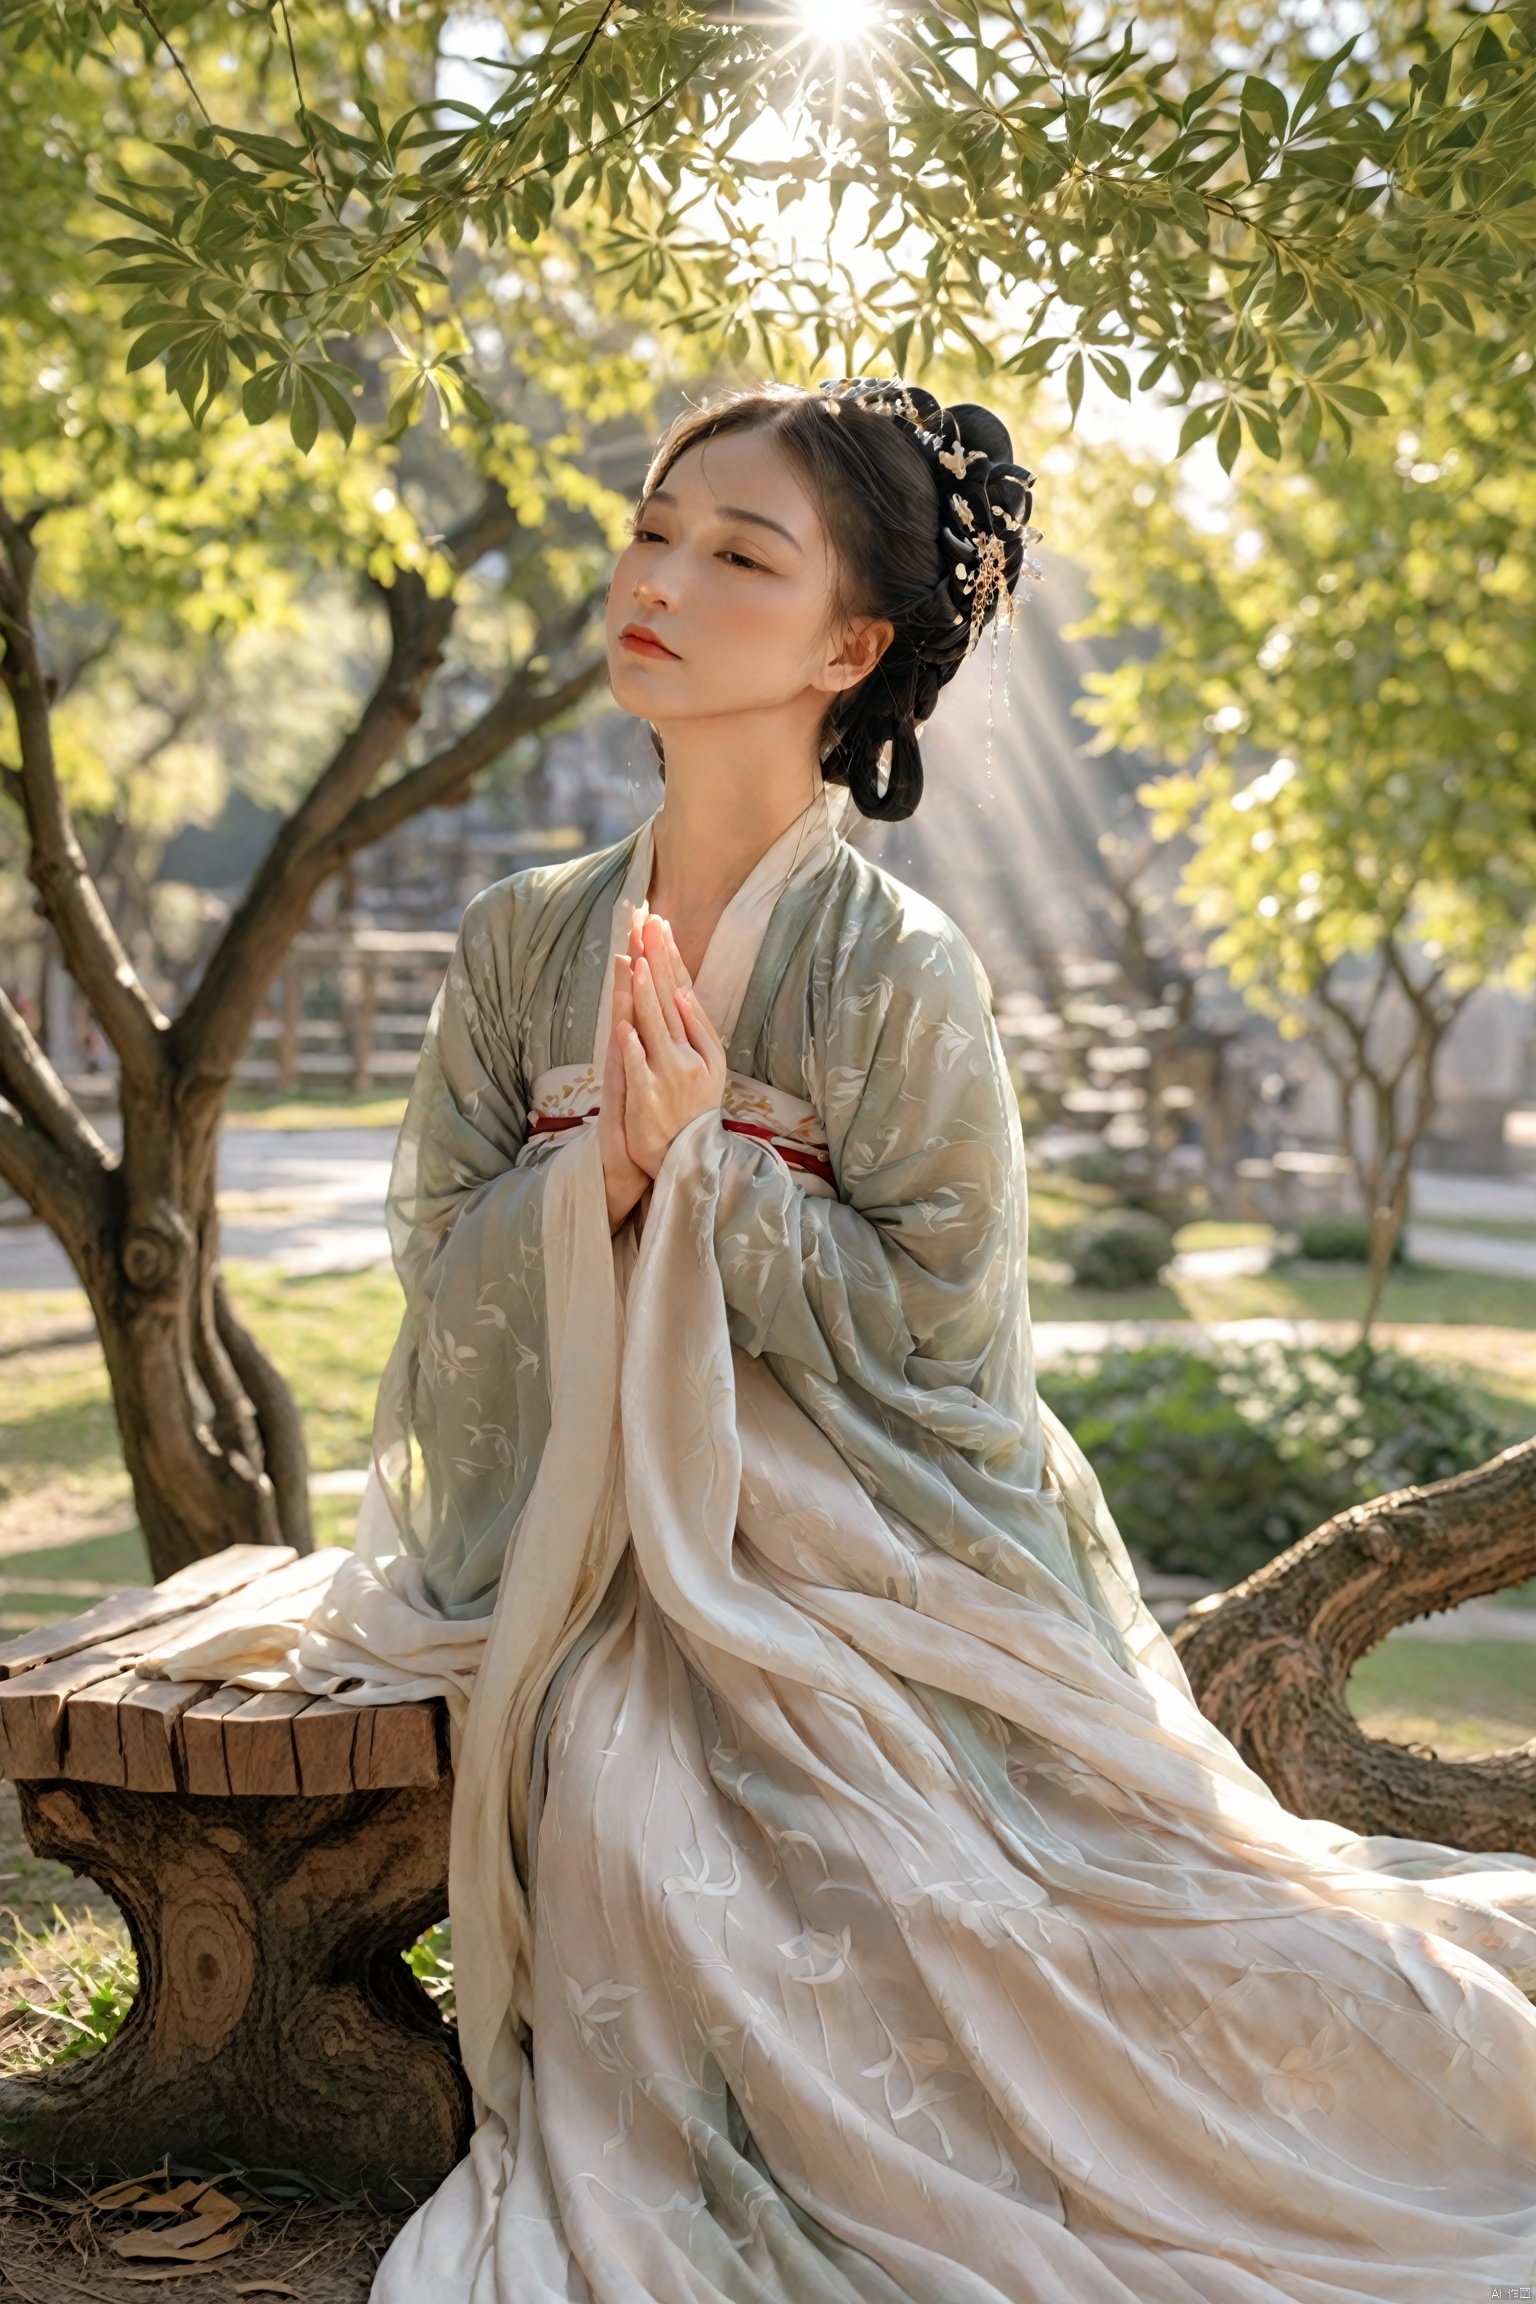 A woman in Hanfu sits on a wooden bench under an ancient tree, the leaves casting dappled shadows on her face. The sun filters through the branches, creating a pattern of light and shade that plays across her serene expression. She is lost in thought, her hands folded in her lap, as if contemplating the wisdom of the centuries-old tree.